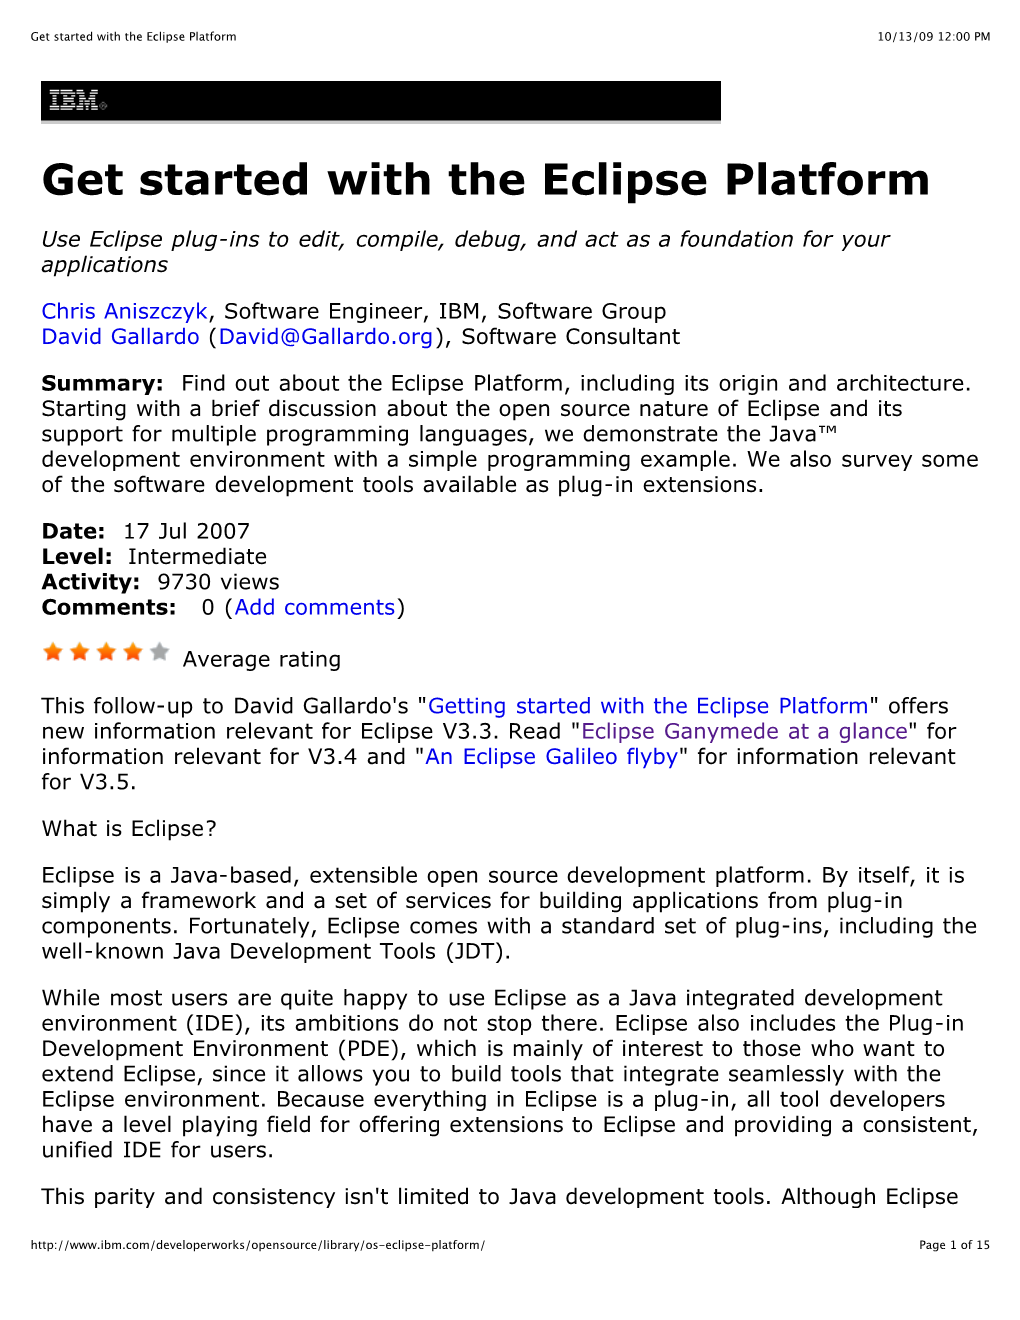 Get Started with the Eclipse Platform 10/13/09 12:00 PM